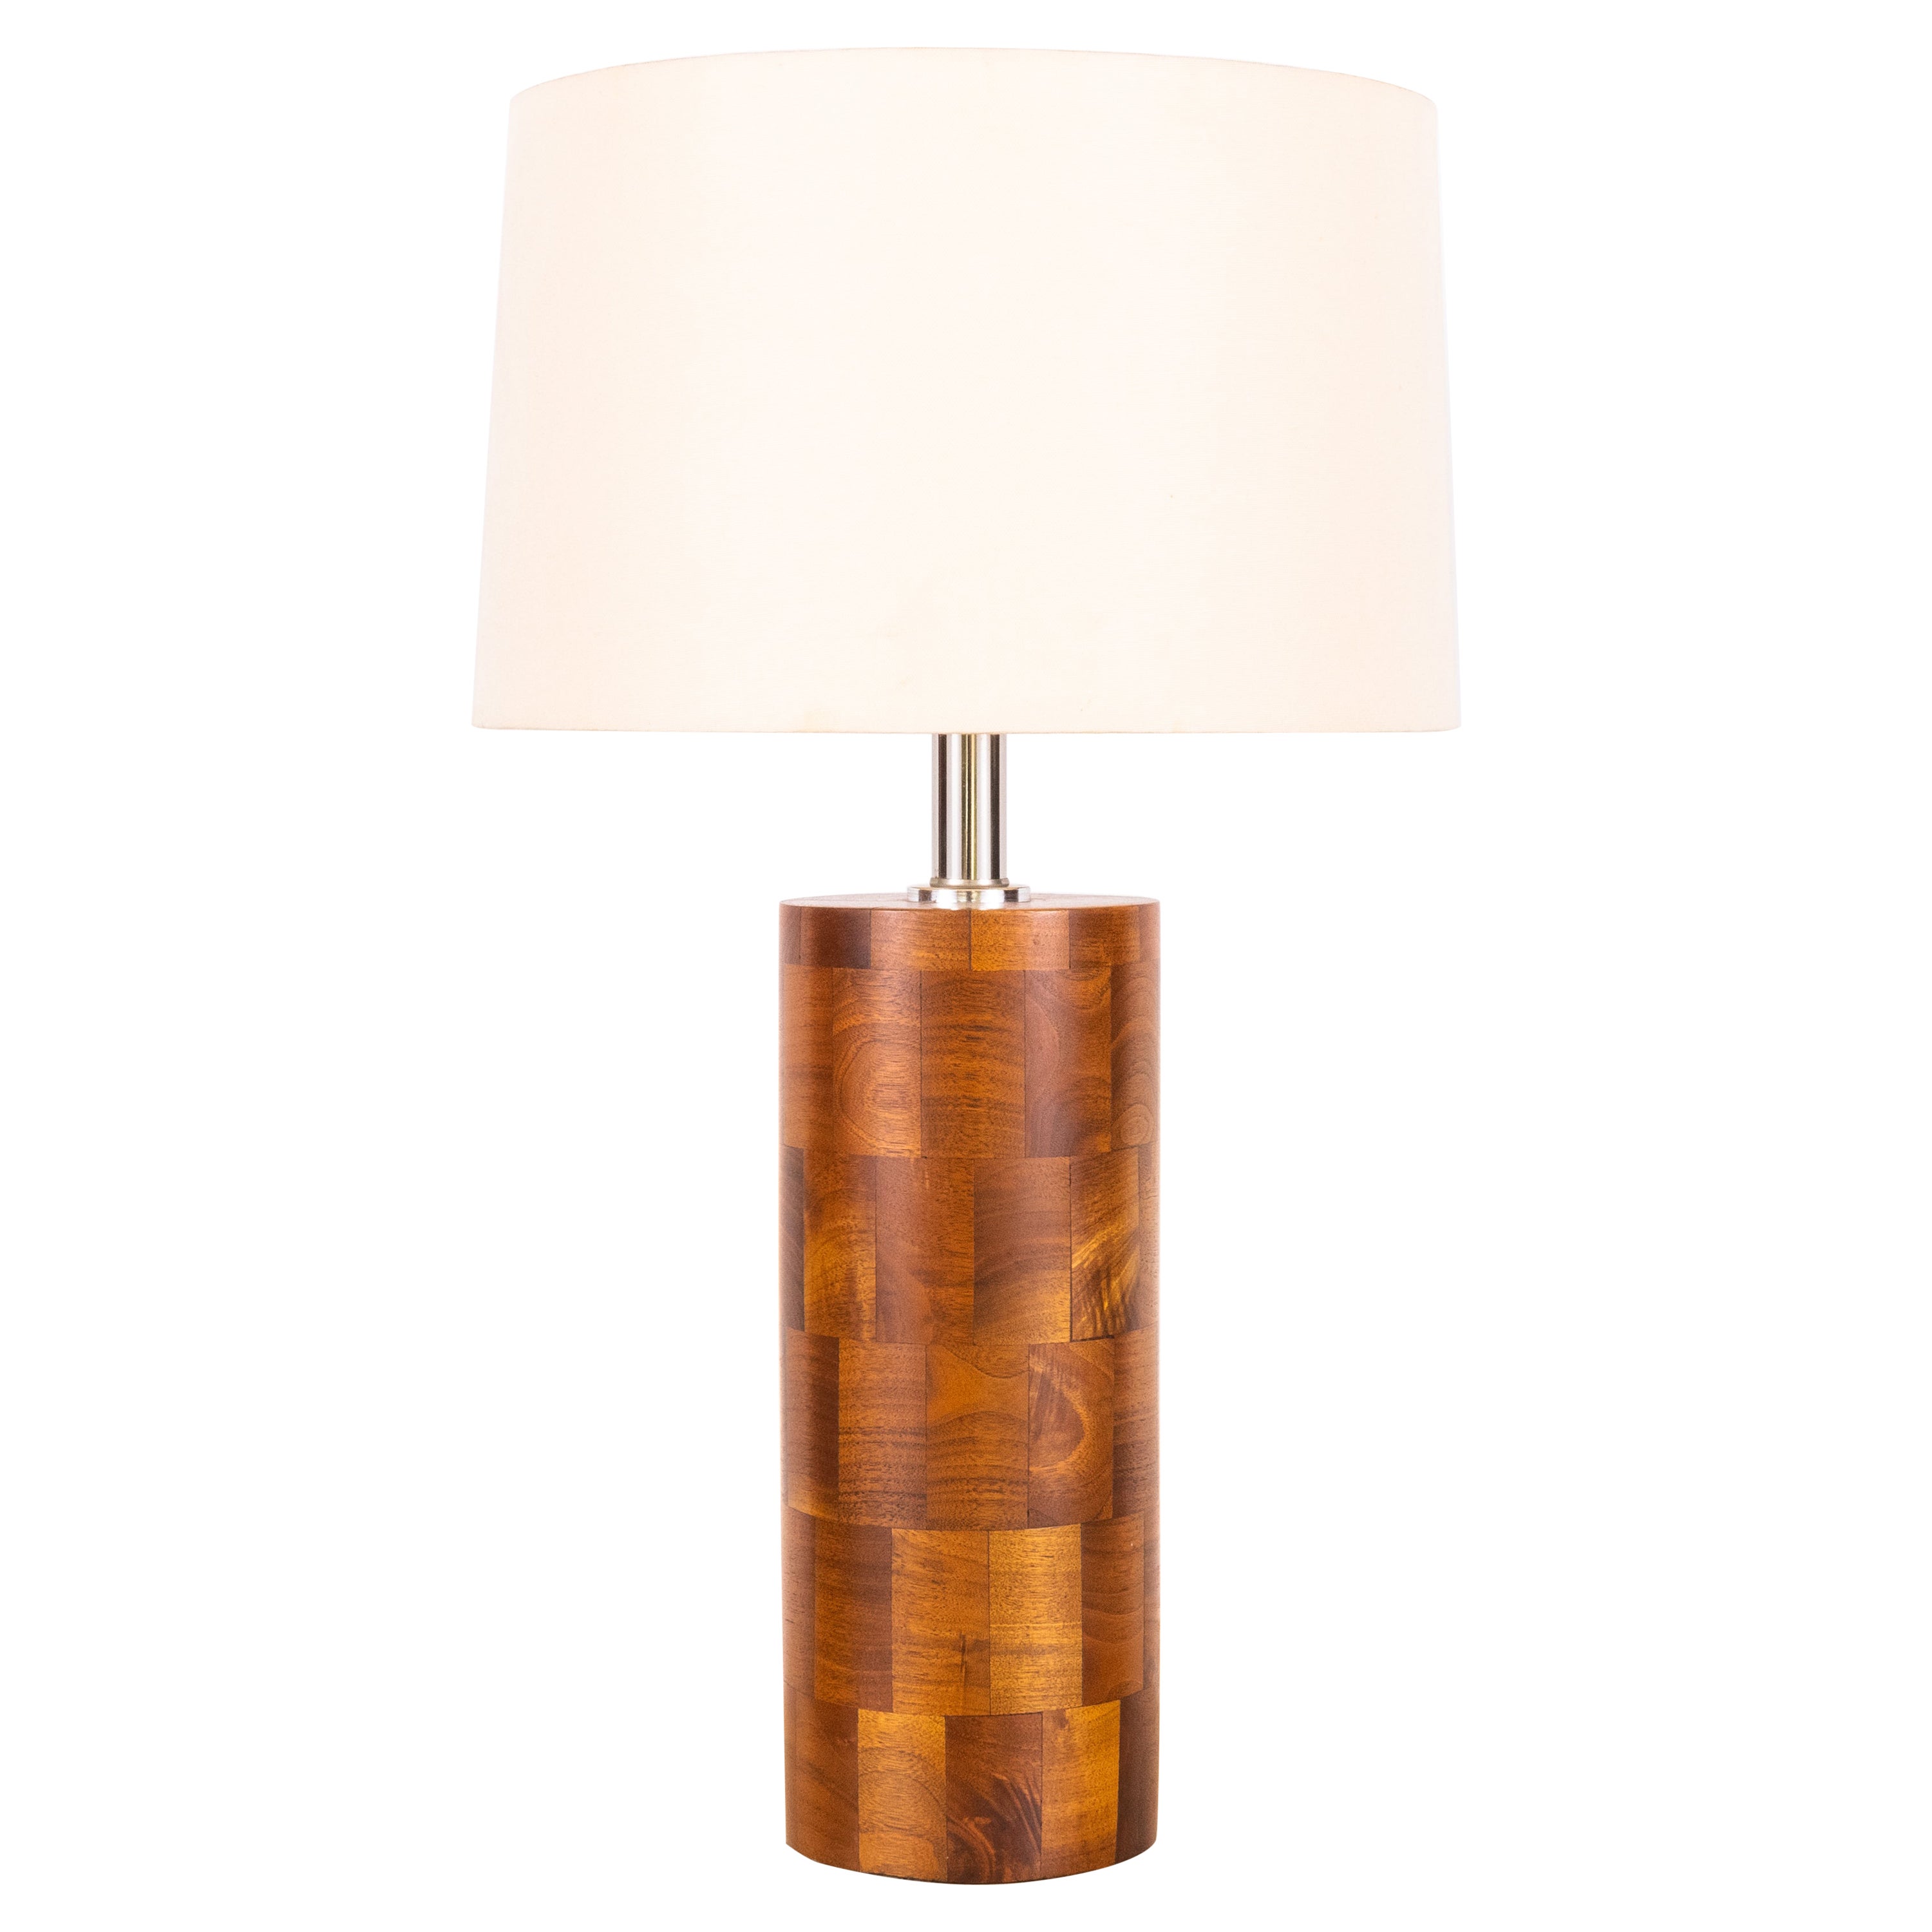 Tall Wood Block Column Lamp with Linen Shade by Amter Craft